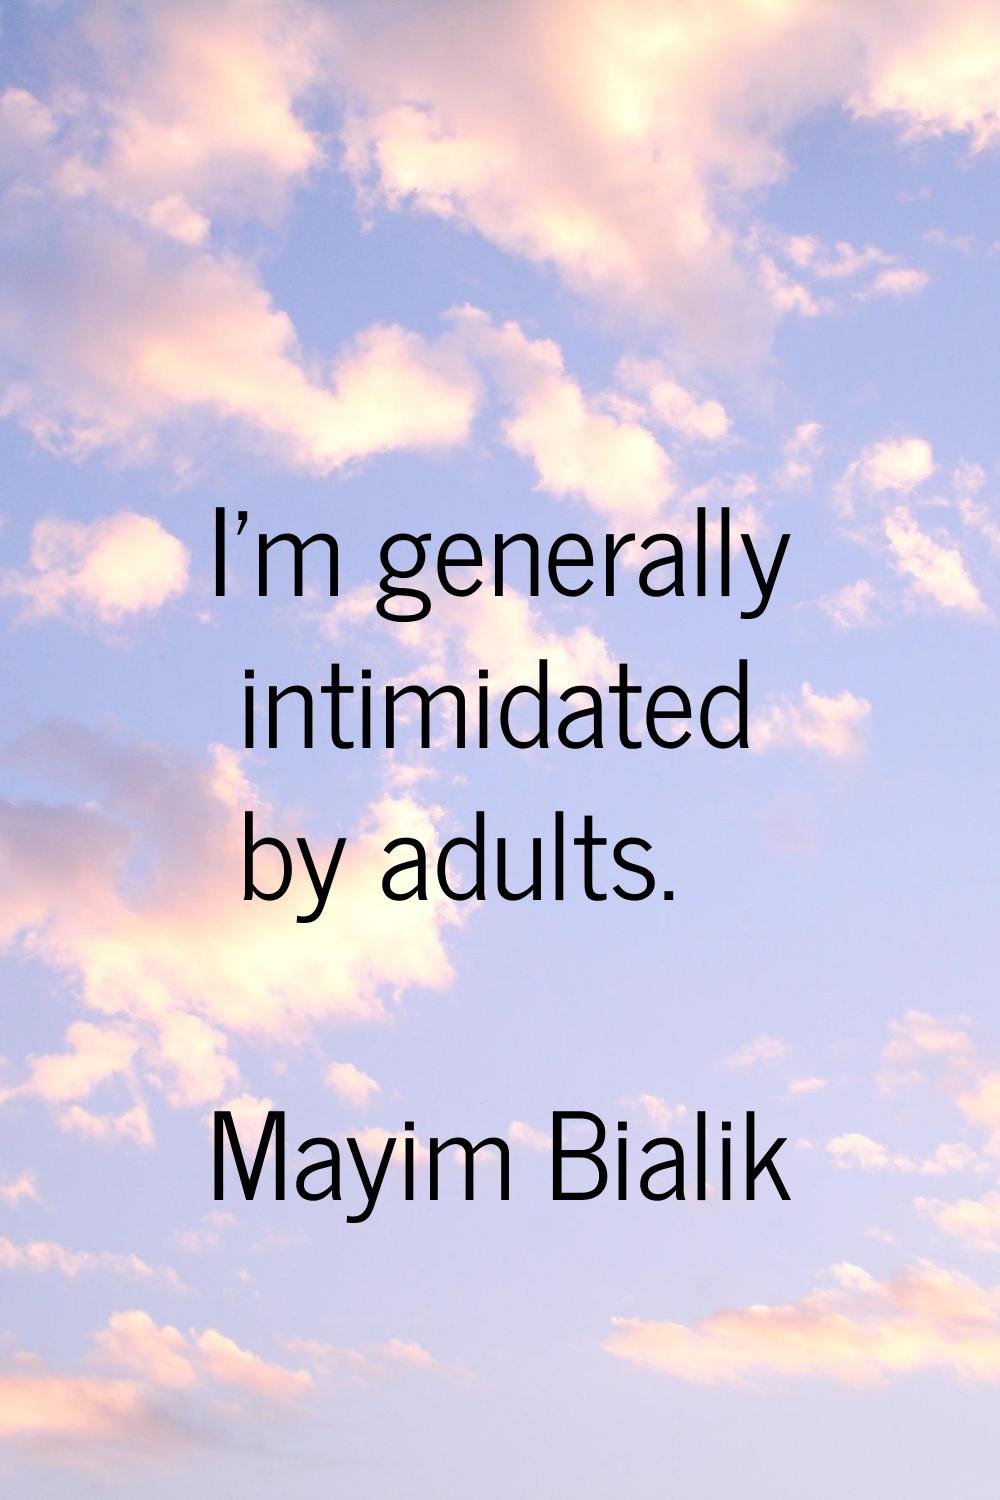 I'm generally intimidated by adults.